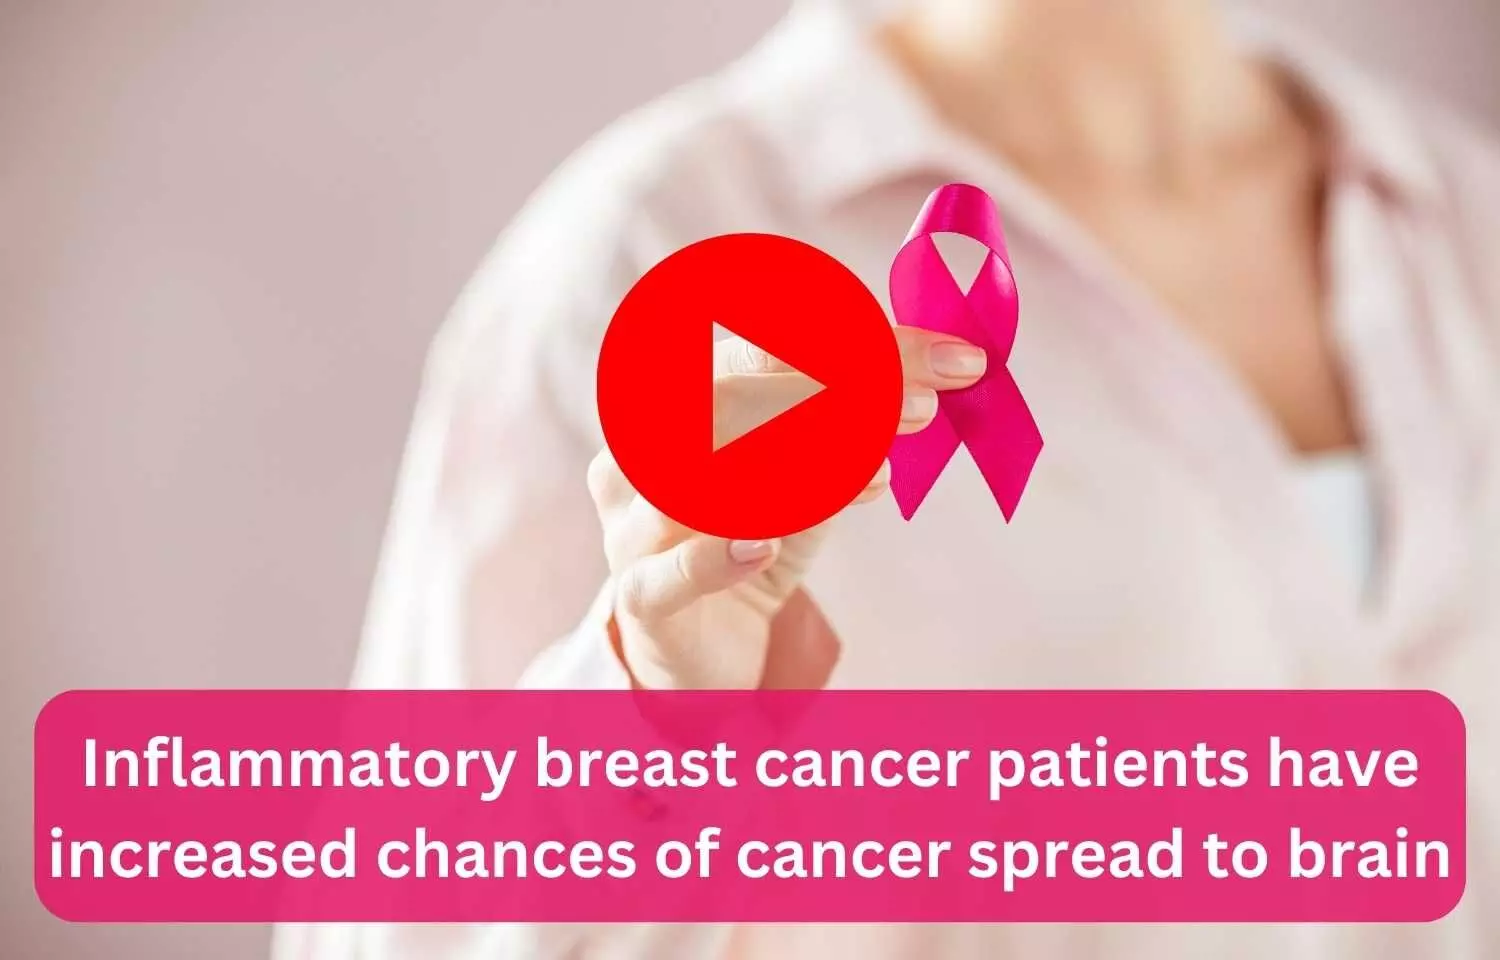 Inflammatory breast cancer patients have increased chances of cancer spread to brain